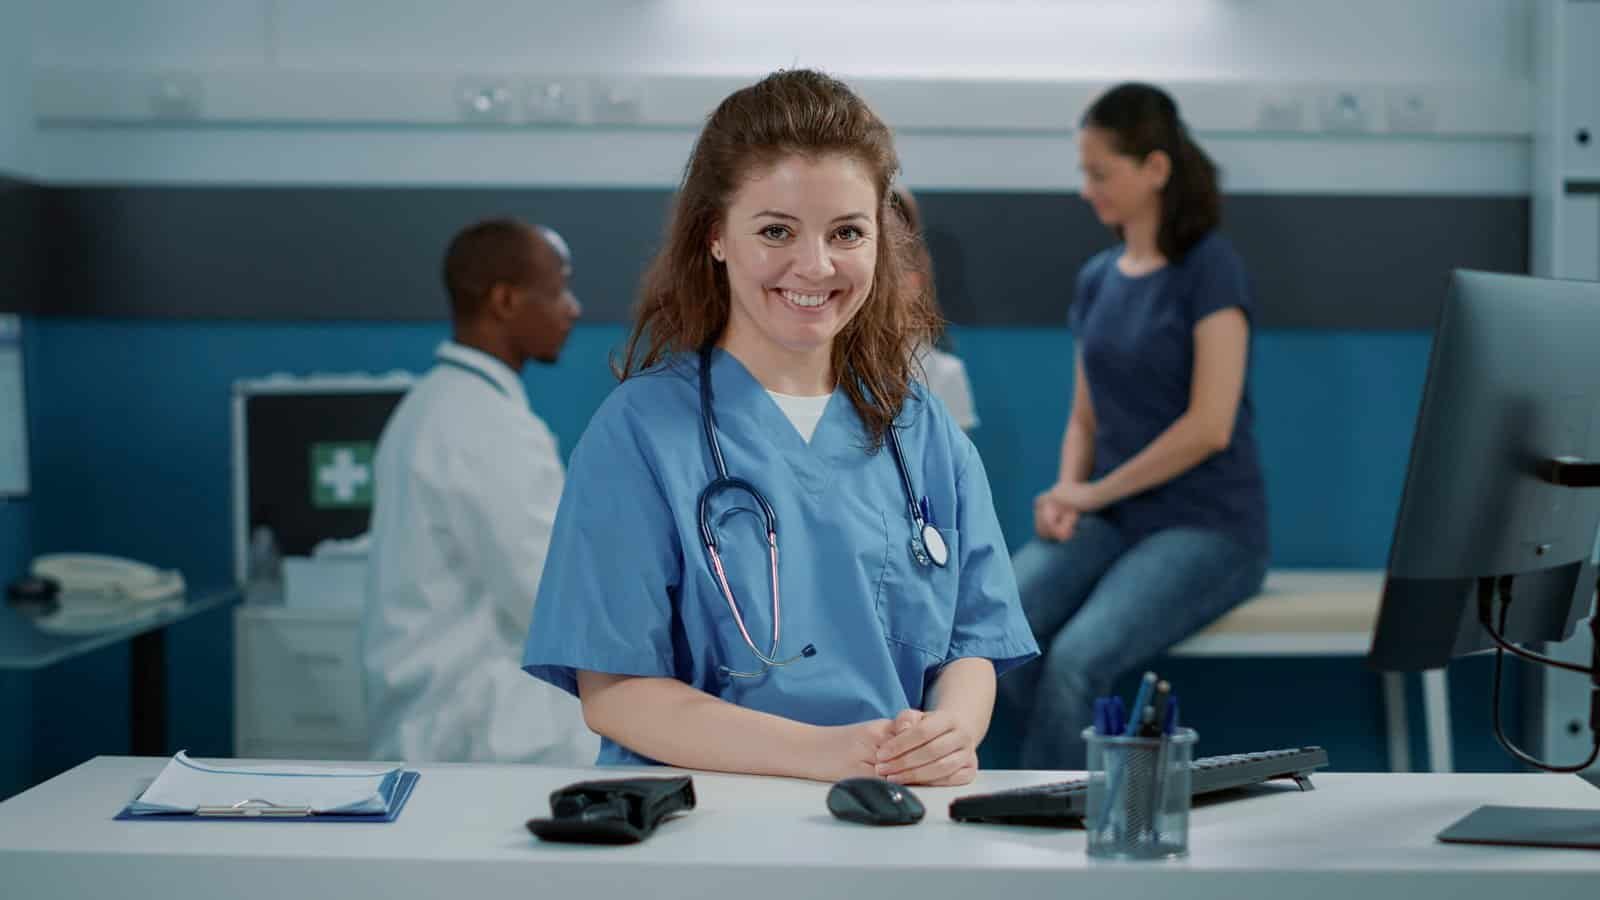 portrait woman nurse smiling wearing uniform office sitting desk medical assistant with stethoscope looking camera getting ready help doctor appointment scaled